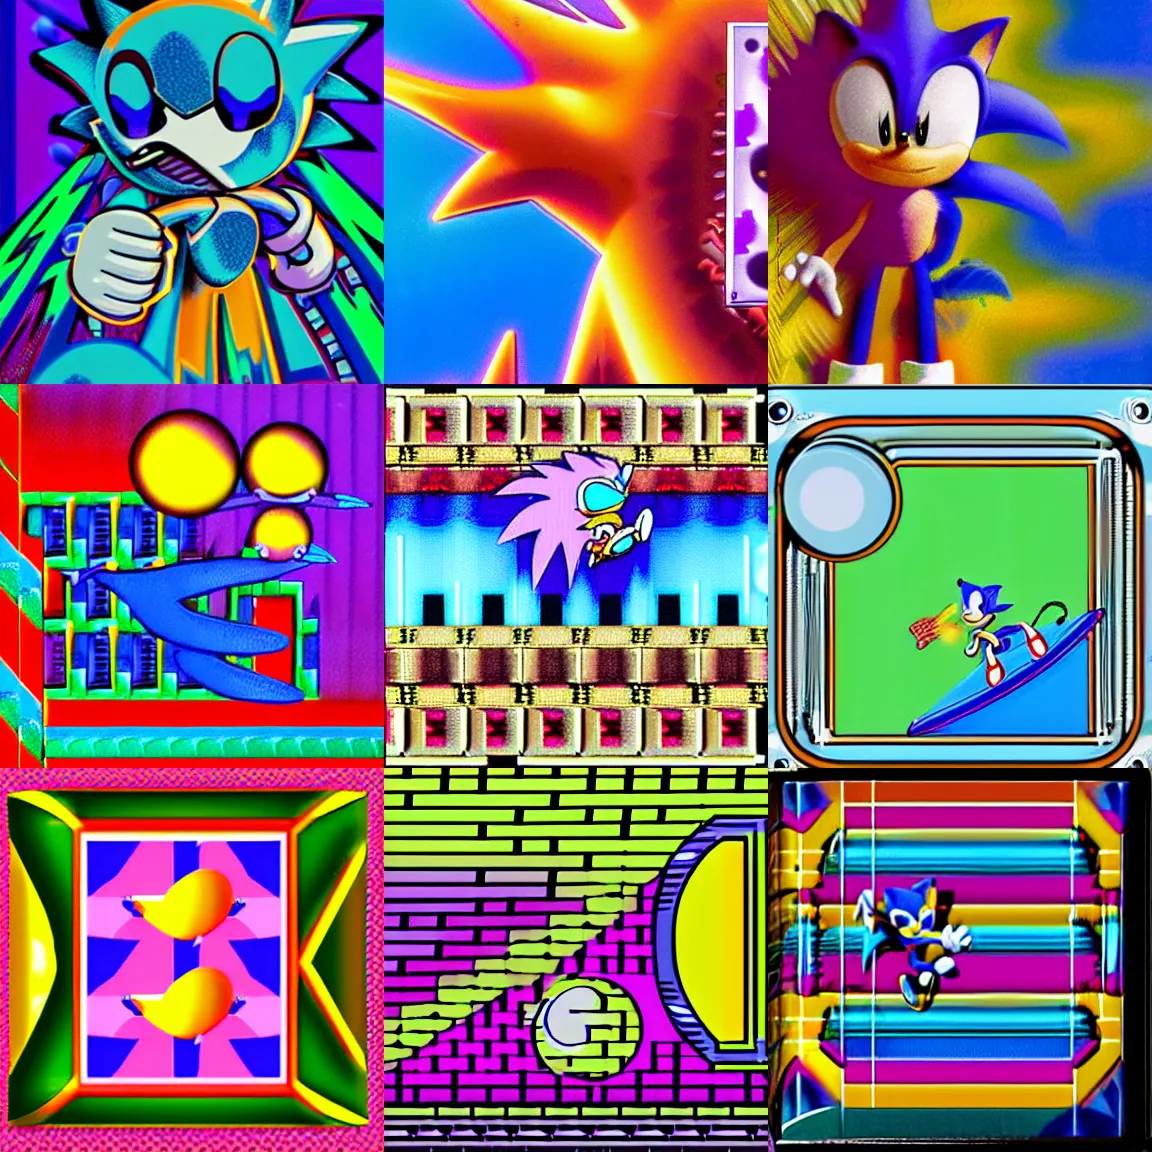 Prompt: sonic the hedgehog in a retro, surreal, faded, sharp, detailed professional, high quality portrait airbrush art mgmt album cover portrait of a liquid dissolving lsd dmt sonic the hedgehog surfing through cyberspace, purple checkerboard background, 1 9 8 0 s 1 9 8 6 sega genesis video game album cover